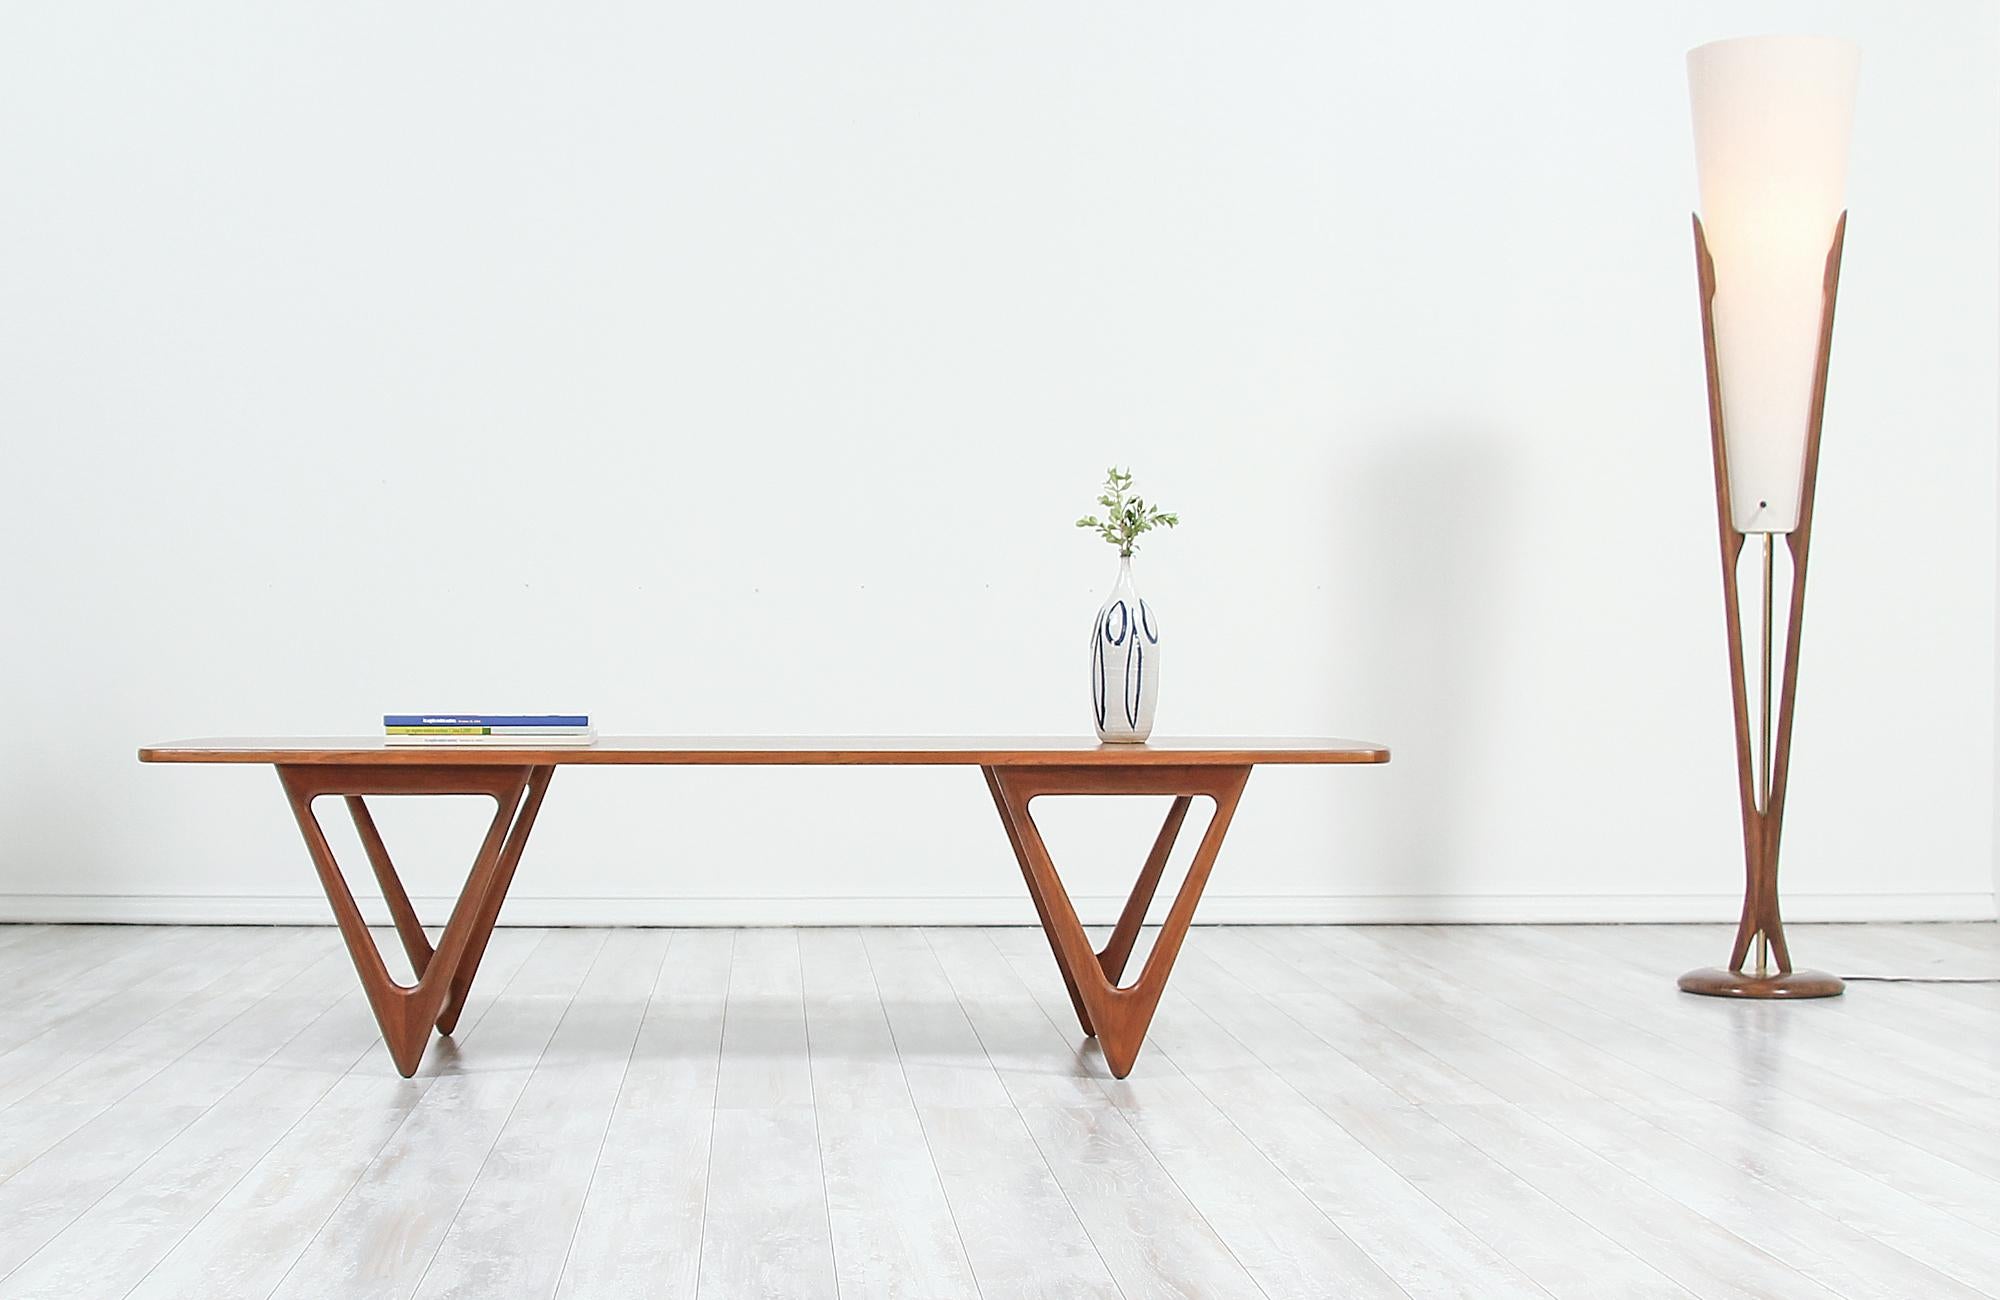 Sculpted modern surfboard coffee table designed by Kurt Østervig or Jason Møbler in Denmark, circa 1950s. This stunning carved coffee table features a sturdy teak wood construction with unique triangular legs showcasing the geometric aesthetic of